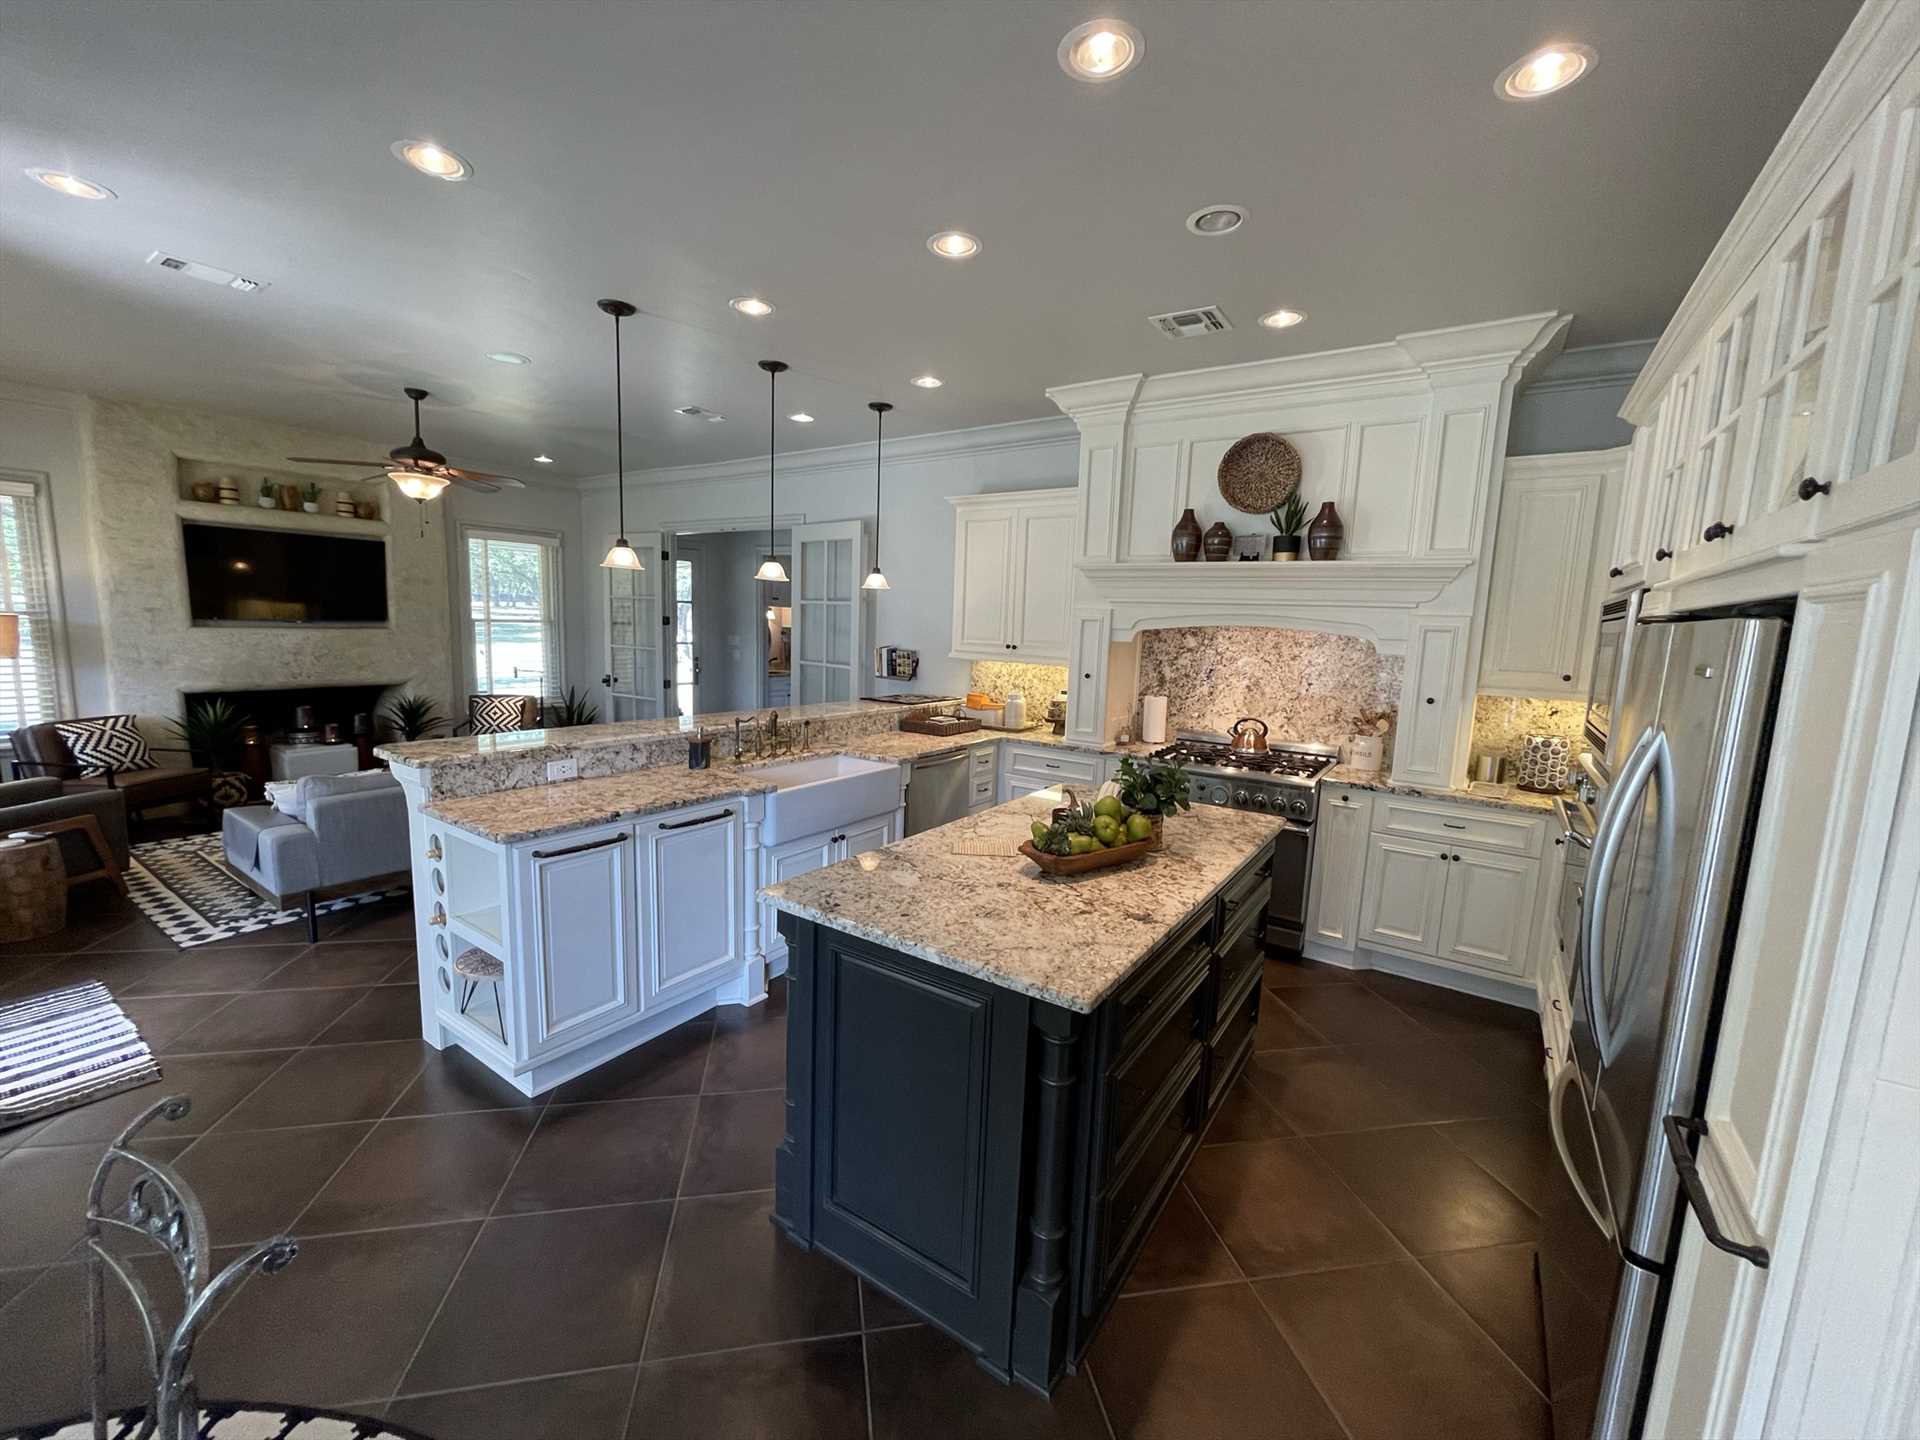                                                 A massive central island, tons of counter space, and gleaming modern appliances make the kitchen a wonderful space for the cooks in your crew!